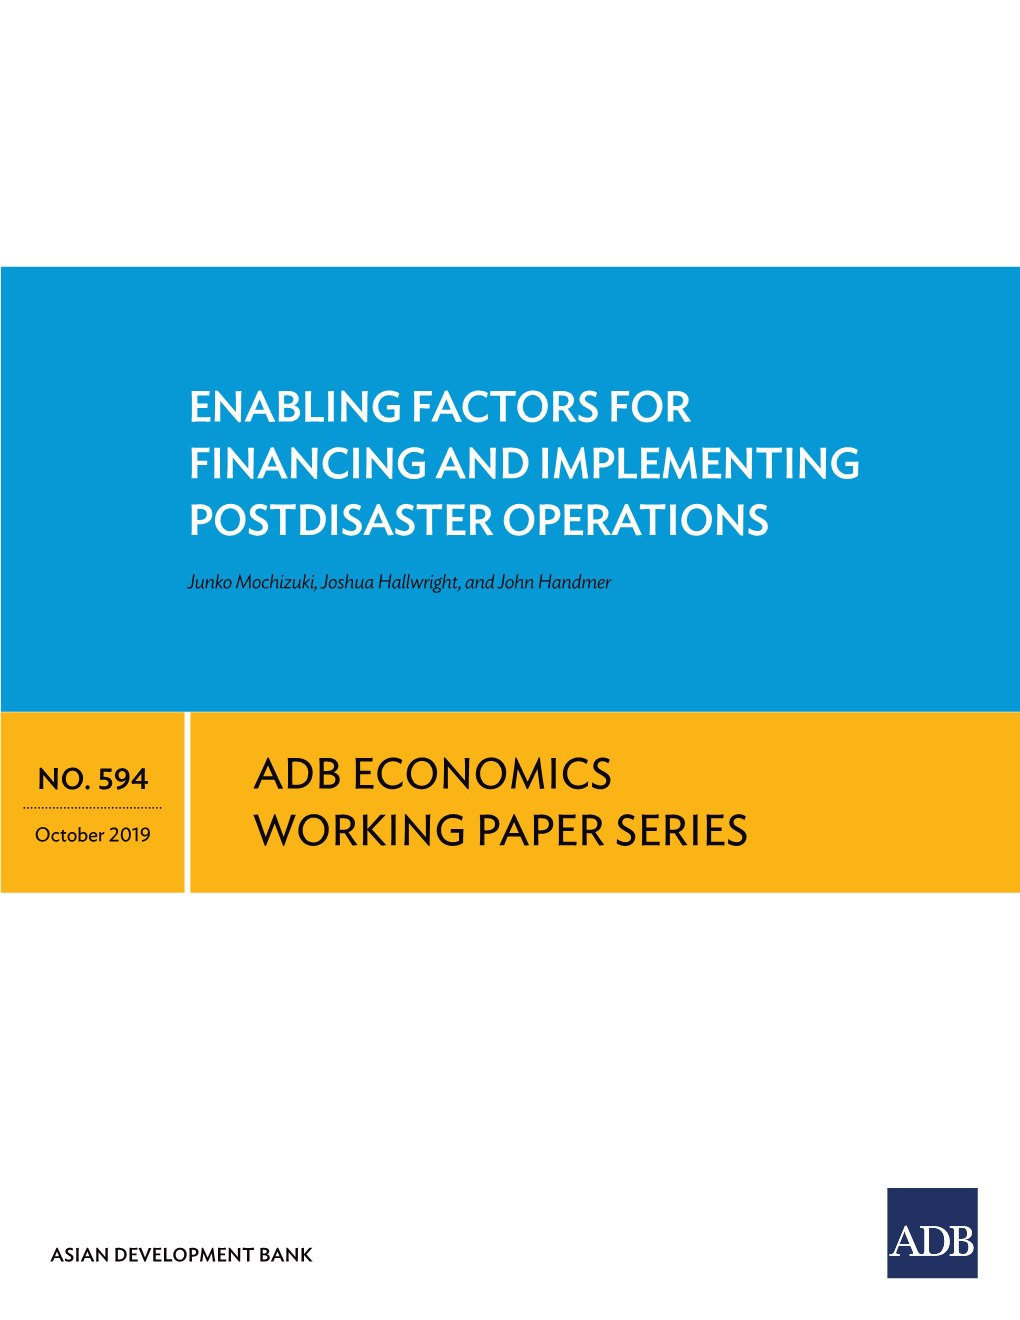 Enabling Factors for Financing and Implementing Postdisaster Operations